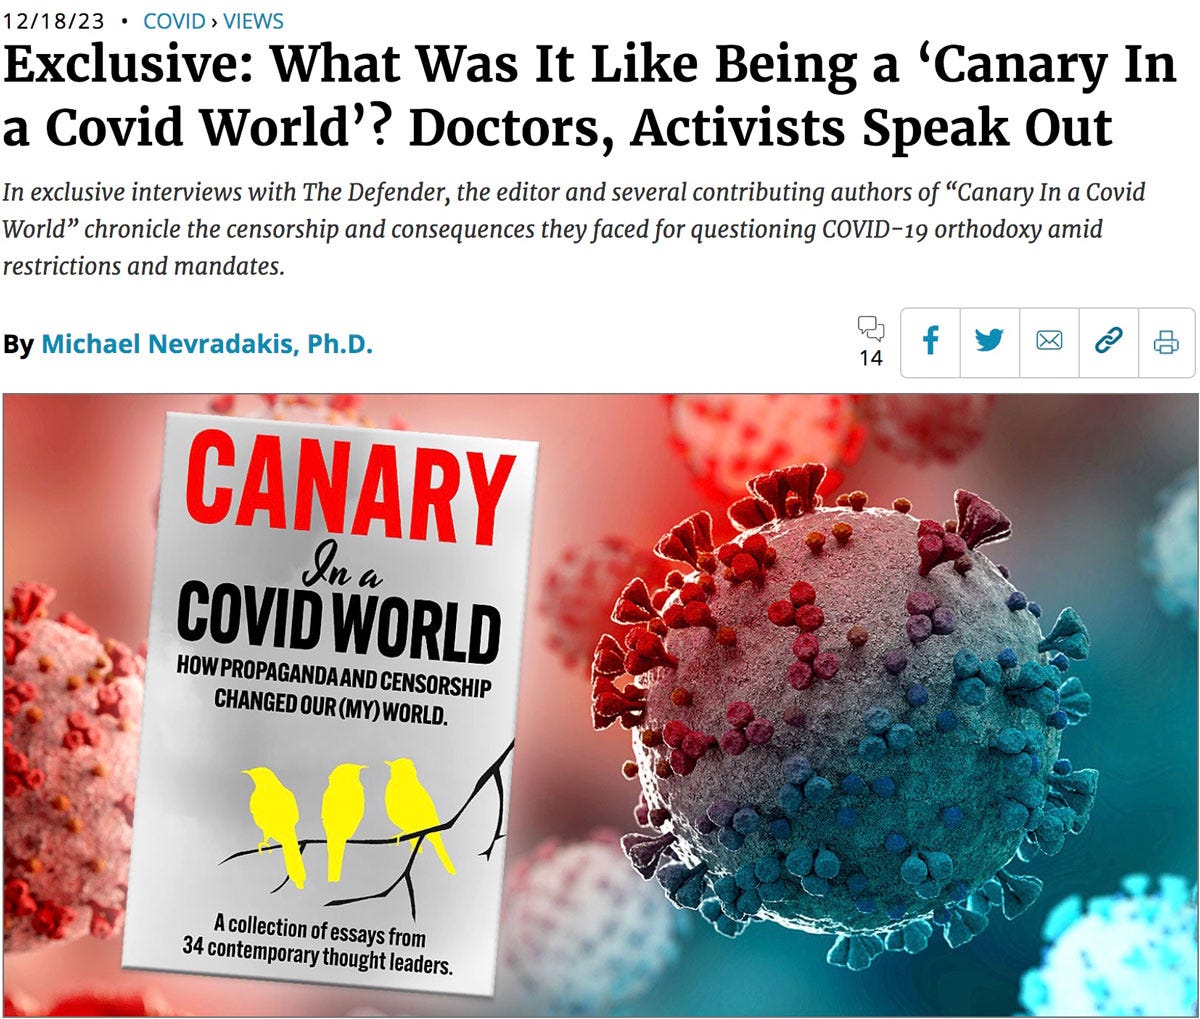 Children's Health Defense: The Defender Article on Canary in a COVID World